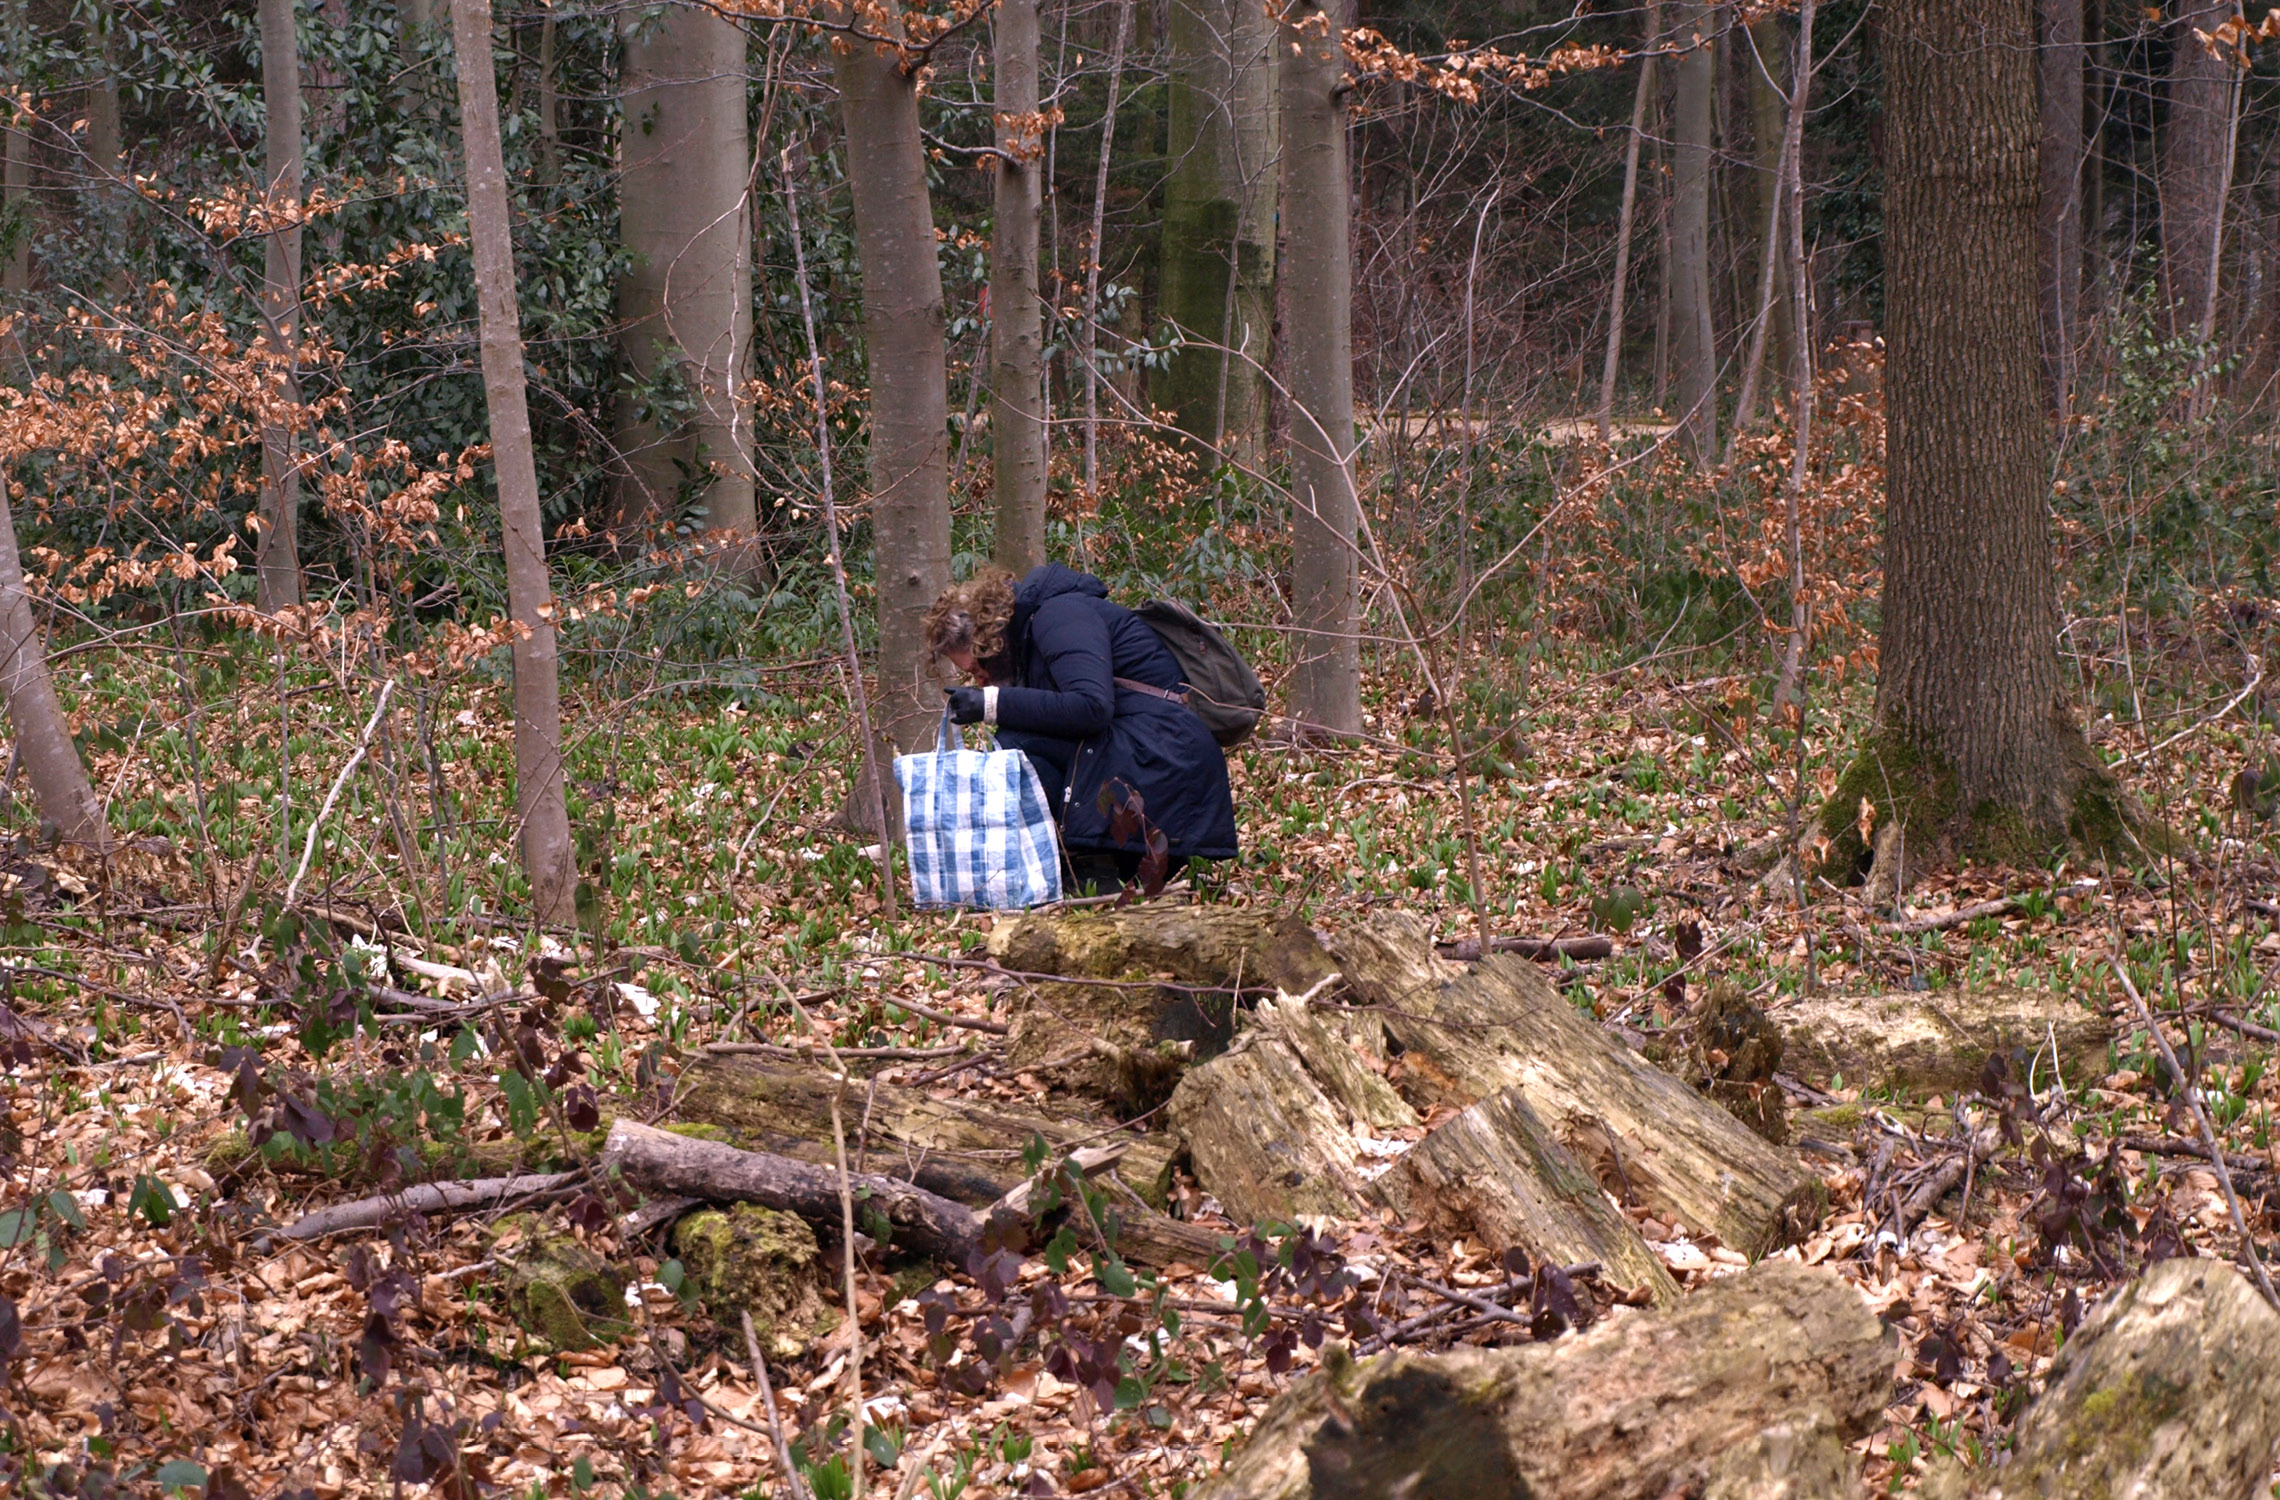 P. collecting pieces of nature in the forest (Zürich)